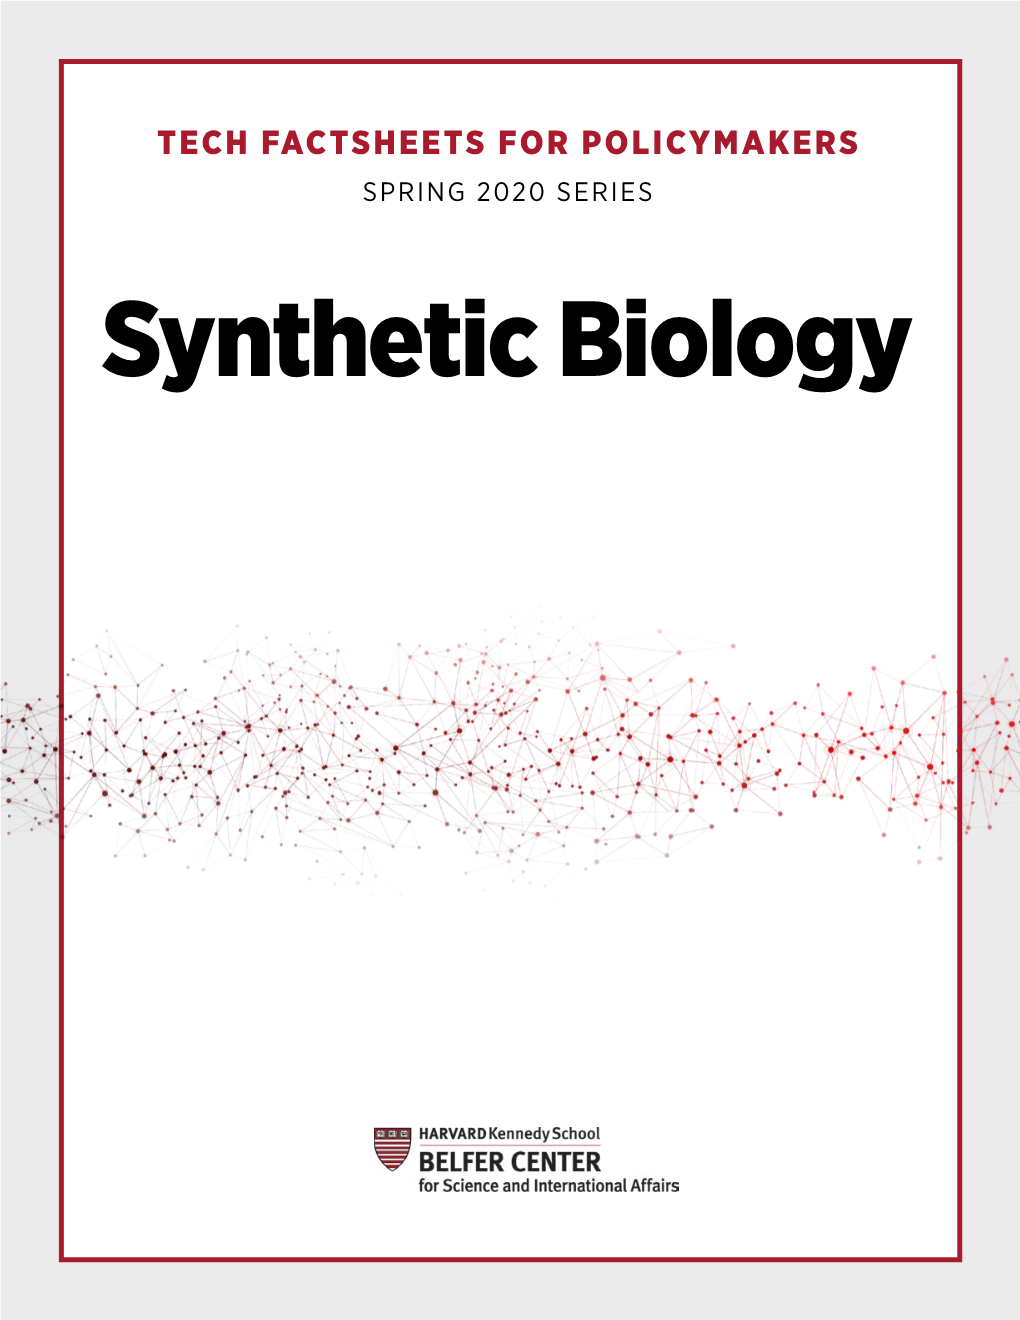 Synthetic Biology CONTRIBUTORS Colin O’Leary (Harvard) Pam Silver (Harvard) Edward Van Opstal (Dod) Michelle Rozo (Dod)